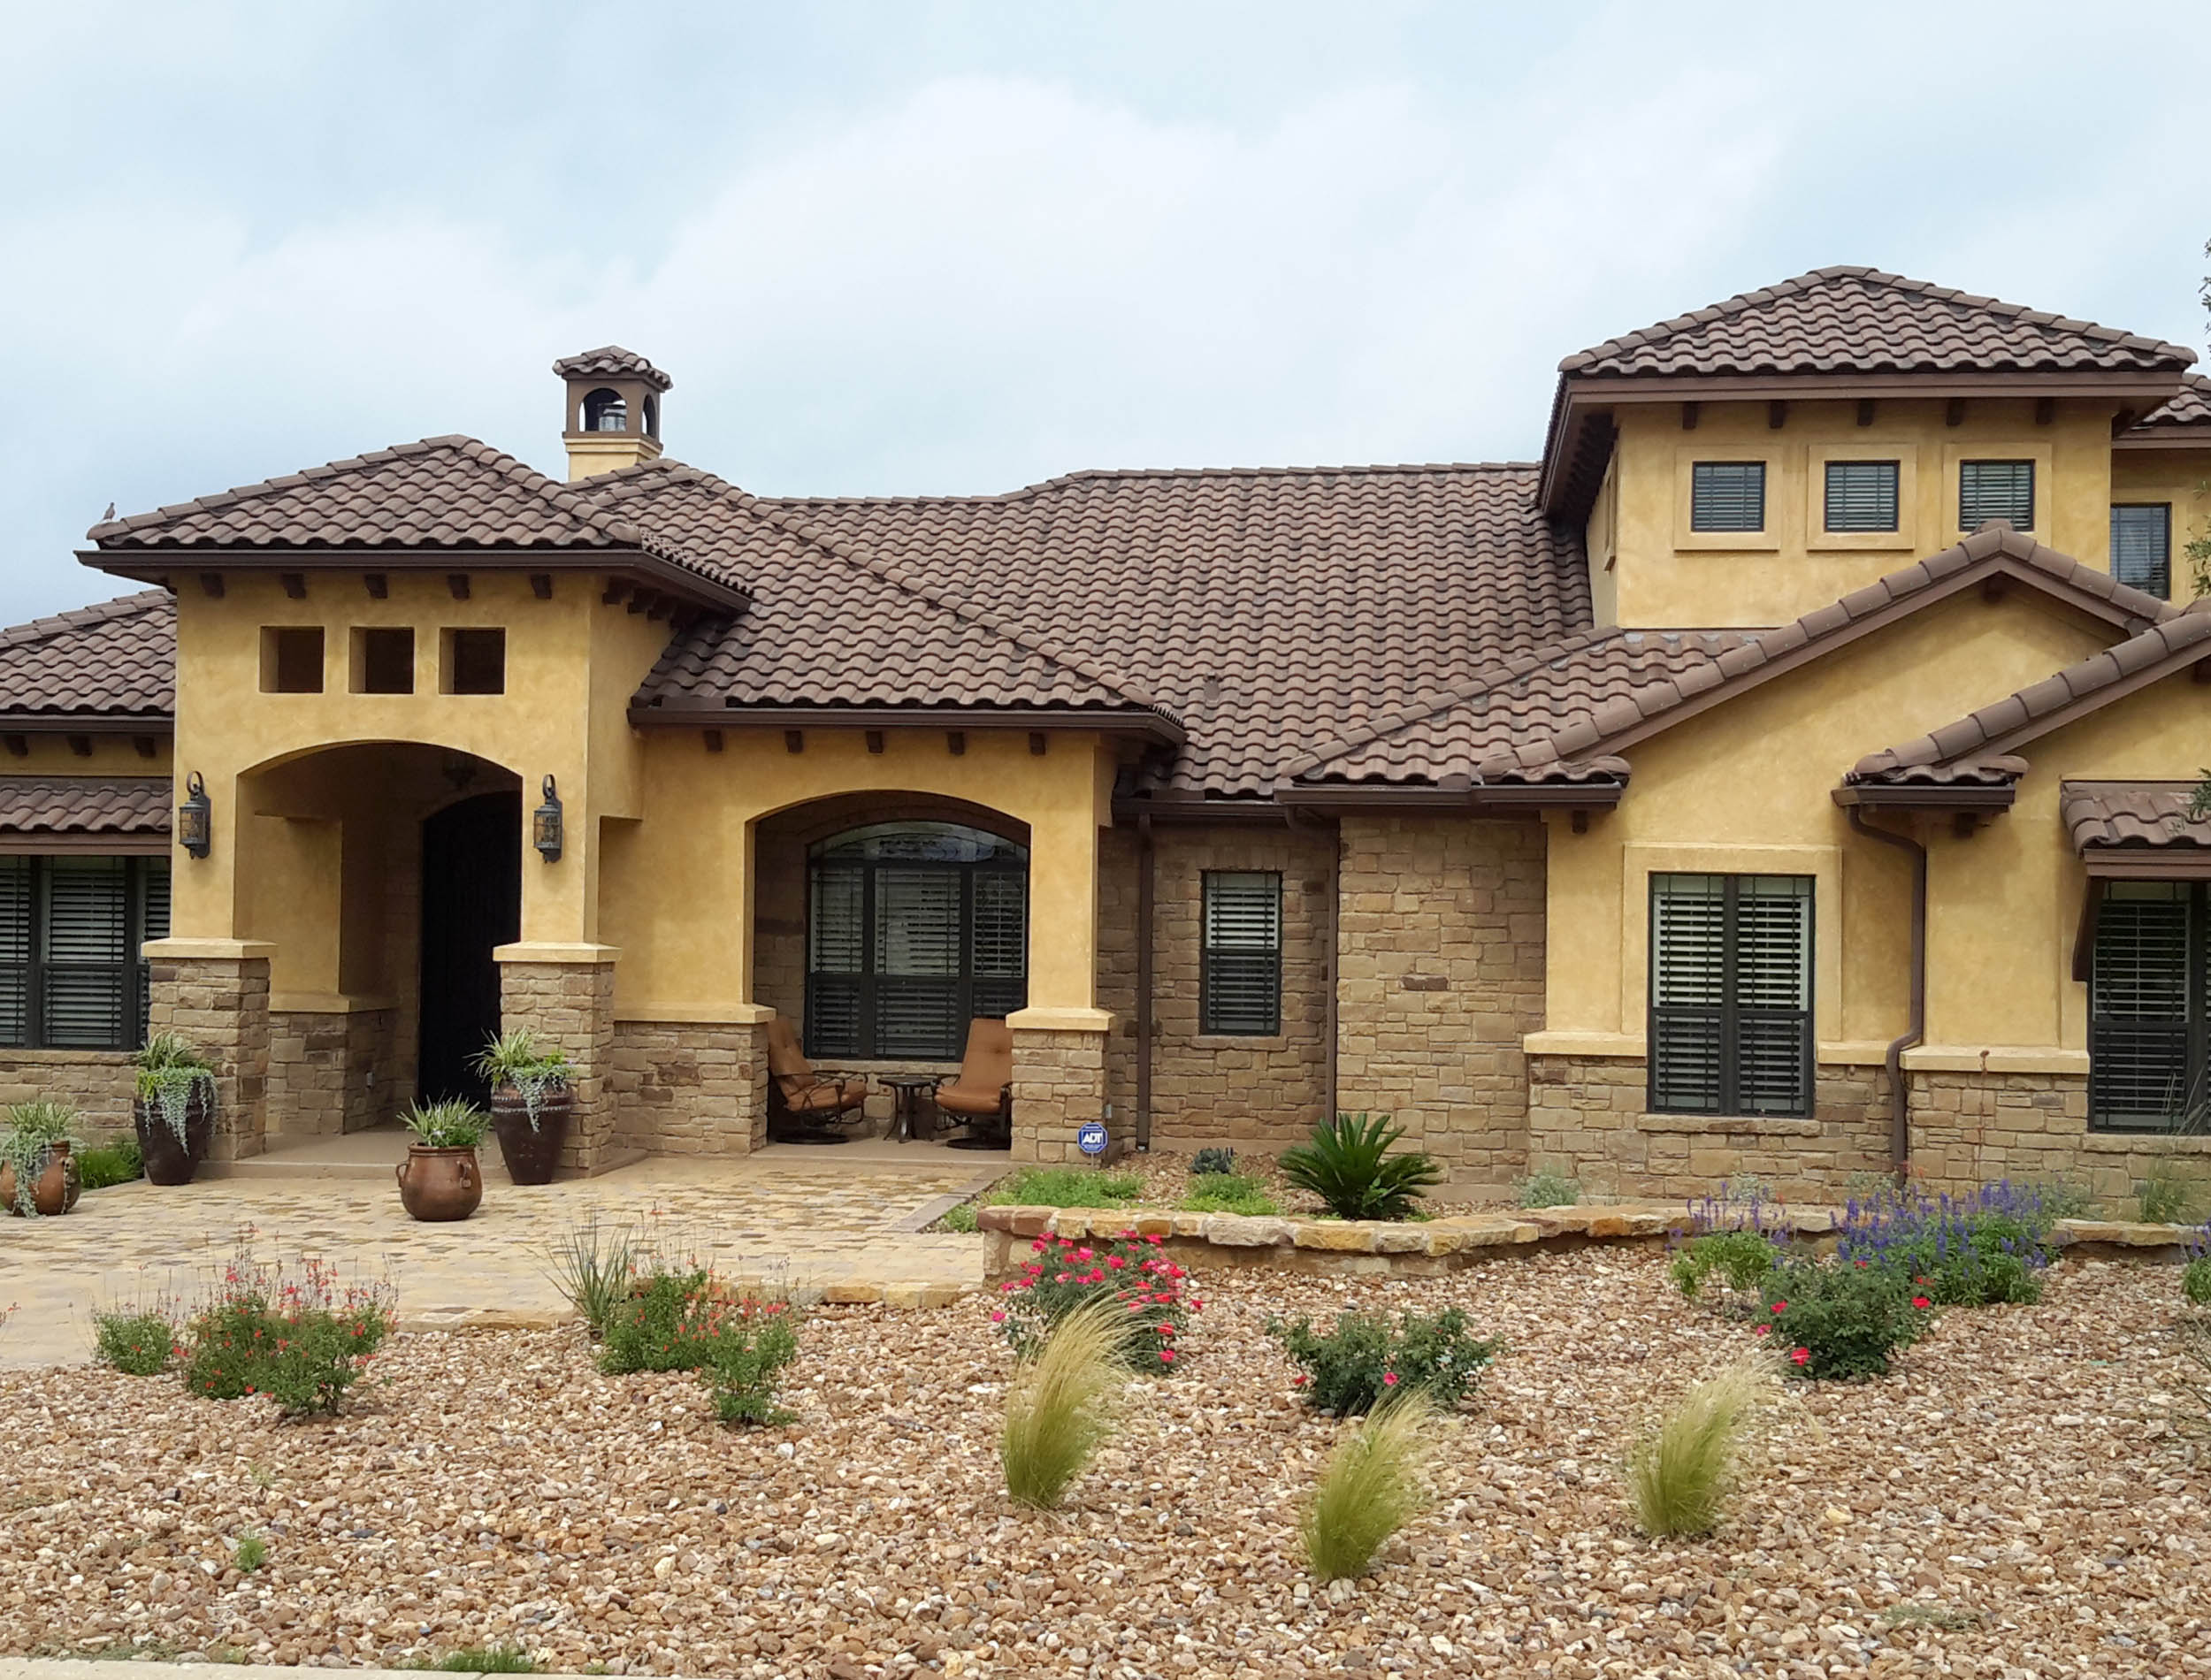 A home in Round Rock, Texas with a new Tile roof installed by TAG Roofing & Exteriors.